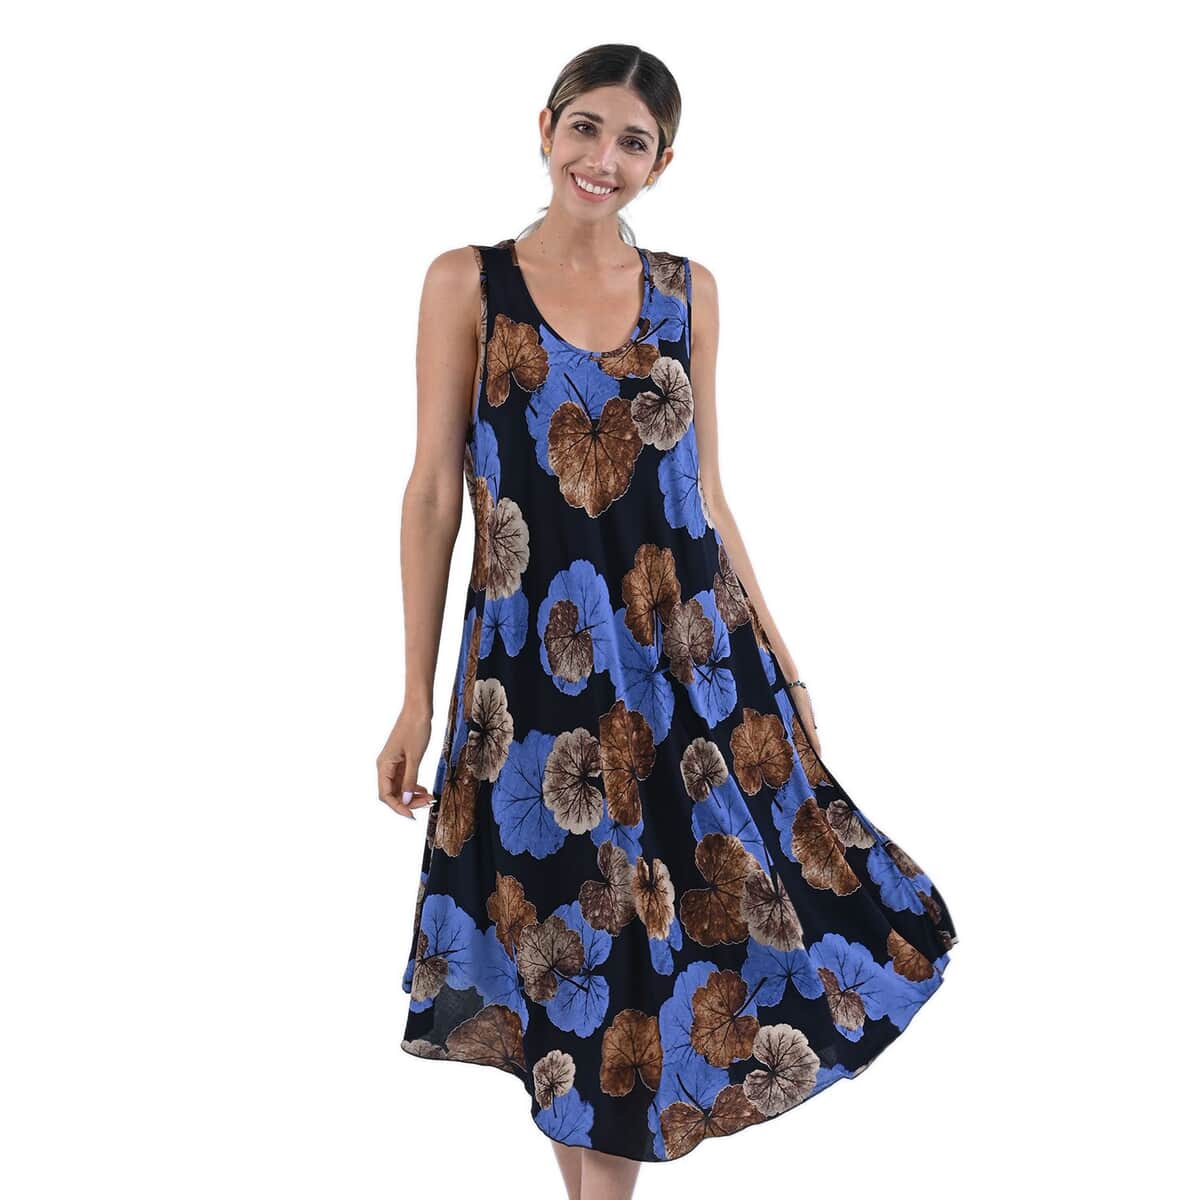 TAMSY Blue Leaf Print Sleeveless A-Line Dress - One Size Fits Most (24"x41") image number 3